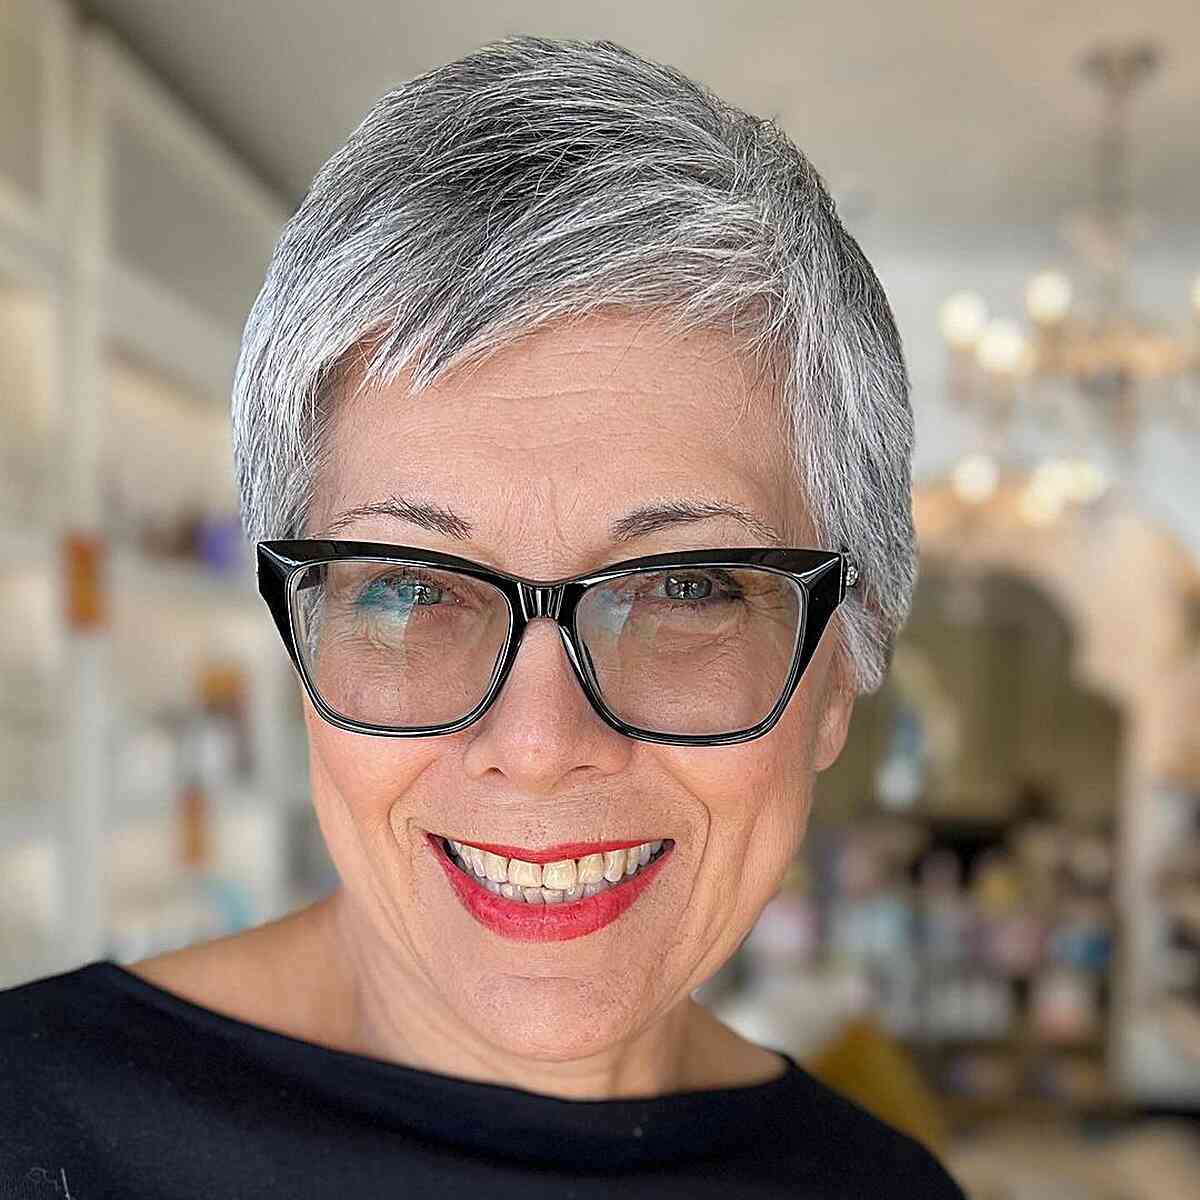 Salt-and-Pepper Short Pixie Haircut on Ladies Over 50 wearing Glasses